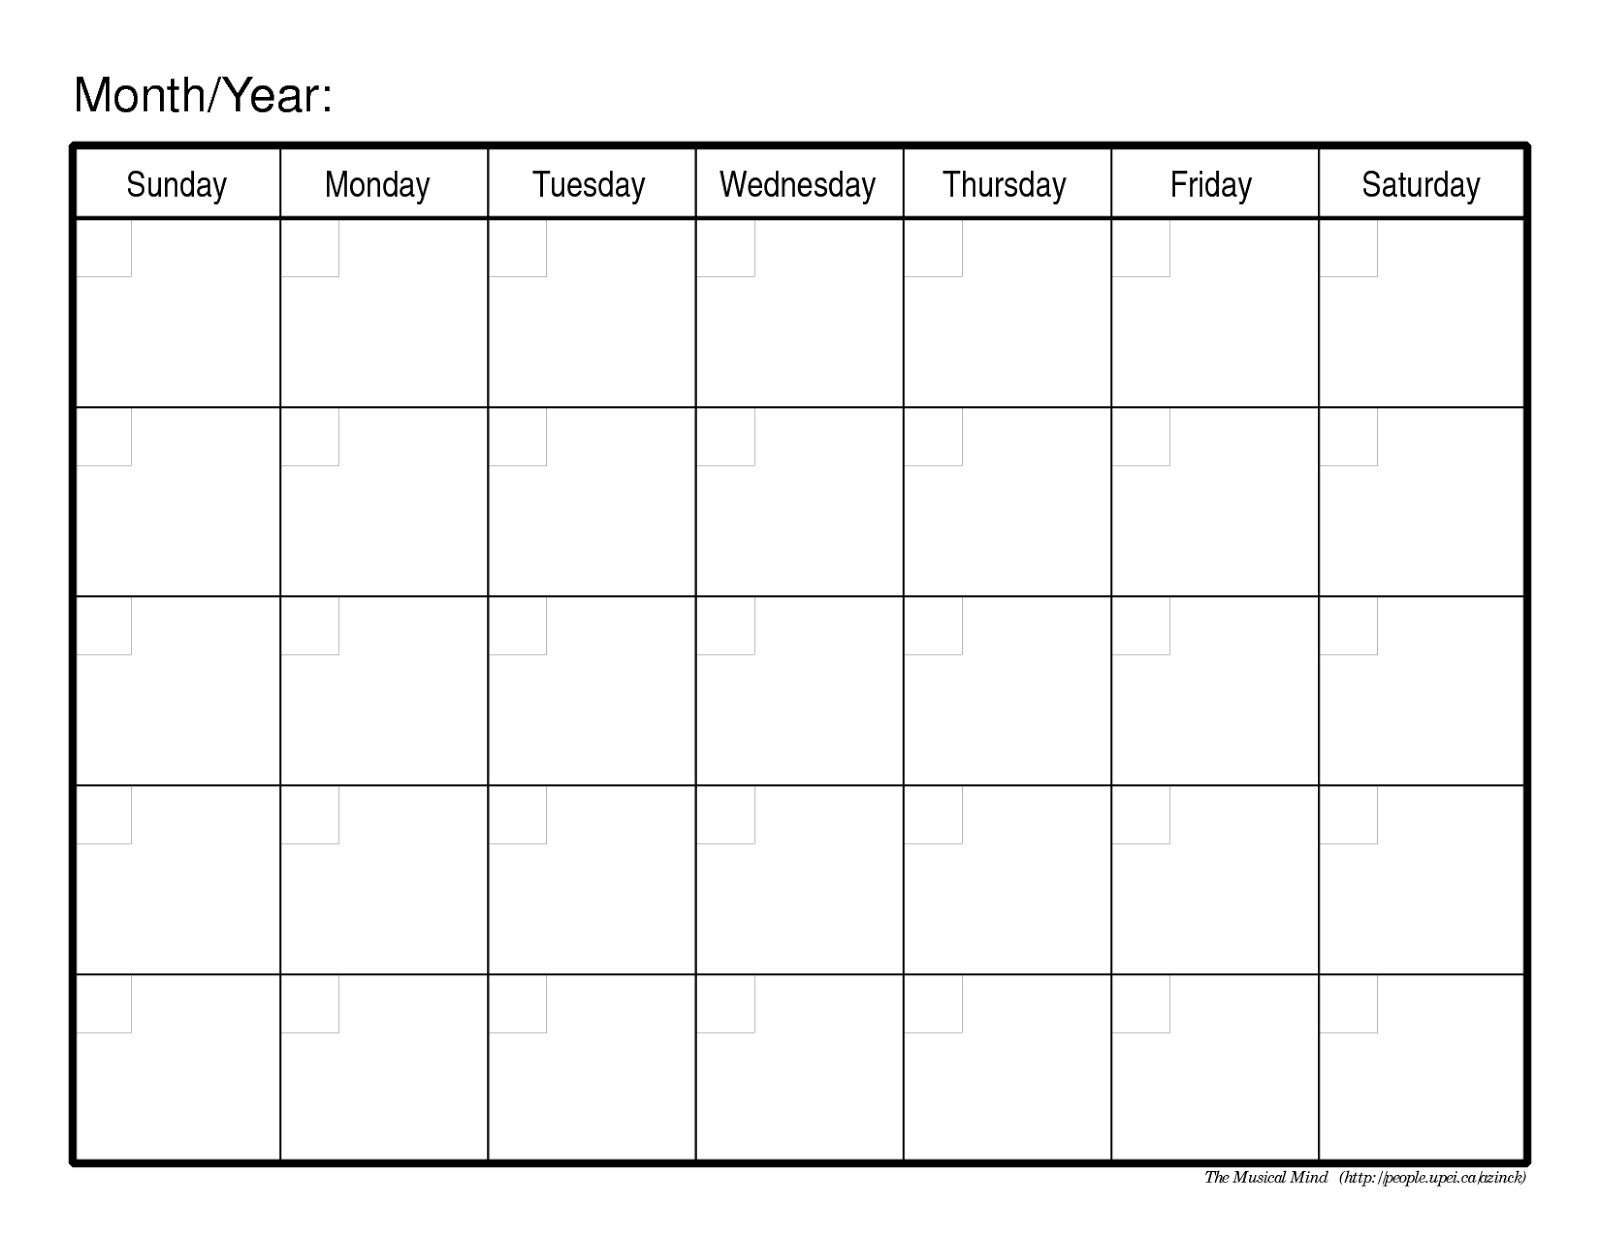 Monthly Calendar No Dates – Printable Month Calendar-Blank Printable Calendar With No Dates